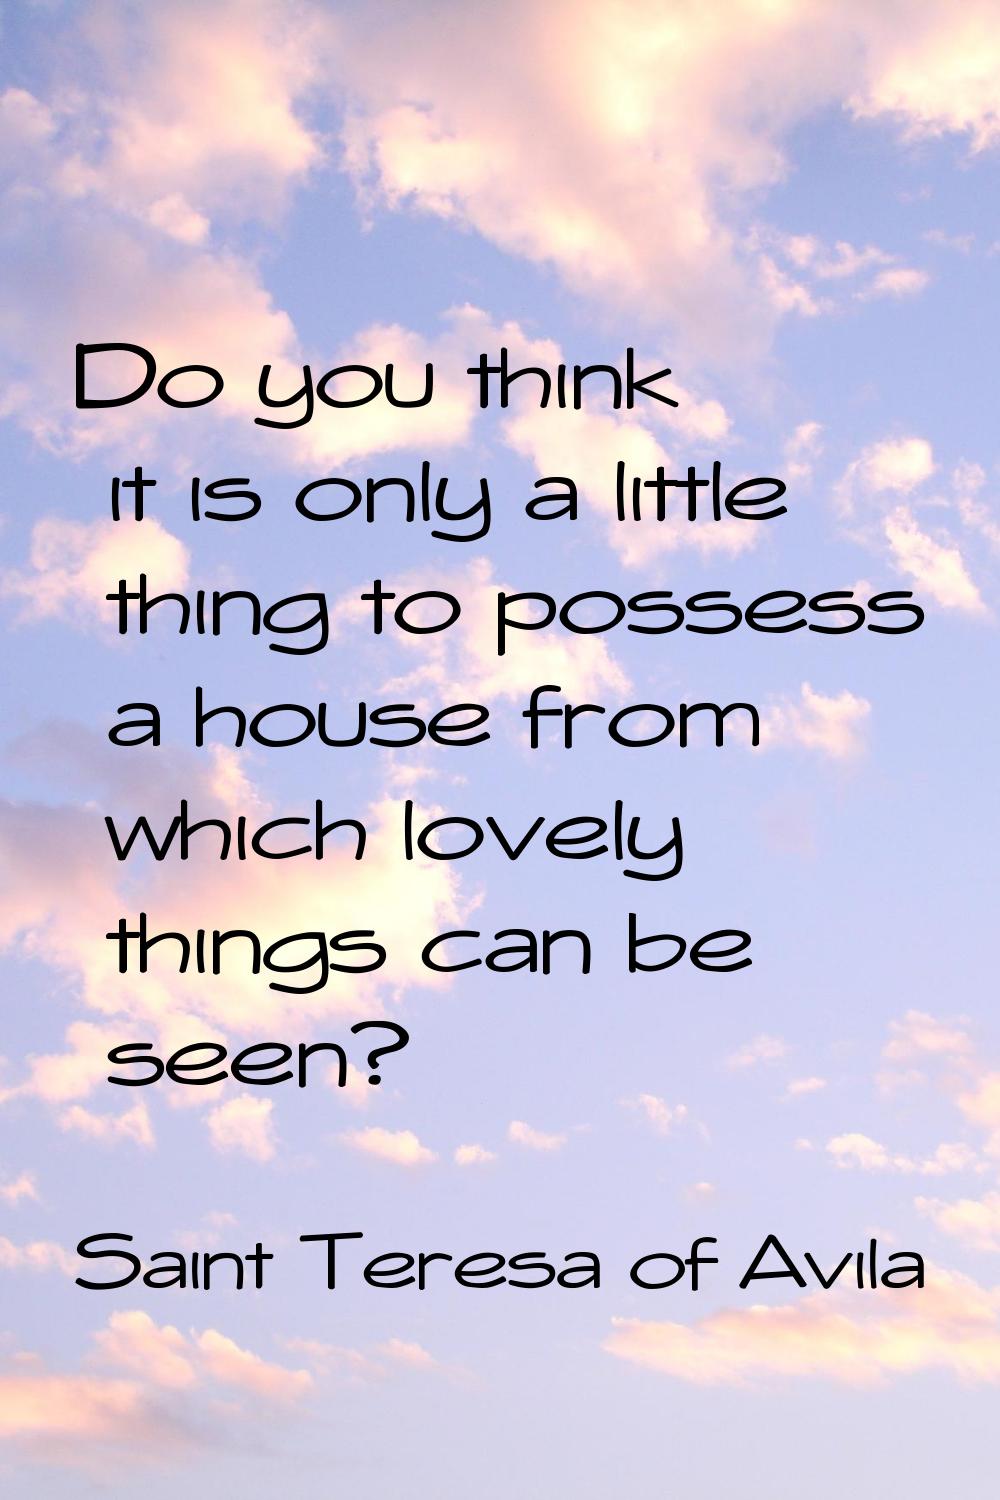 Do you think it is only a little thing to possess a house from which lovely things can be seen?